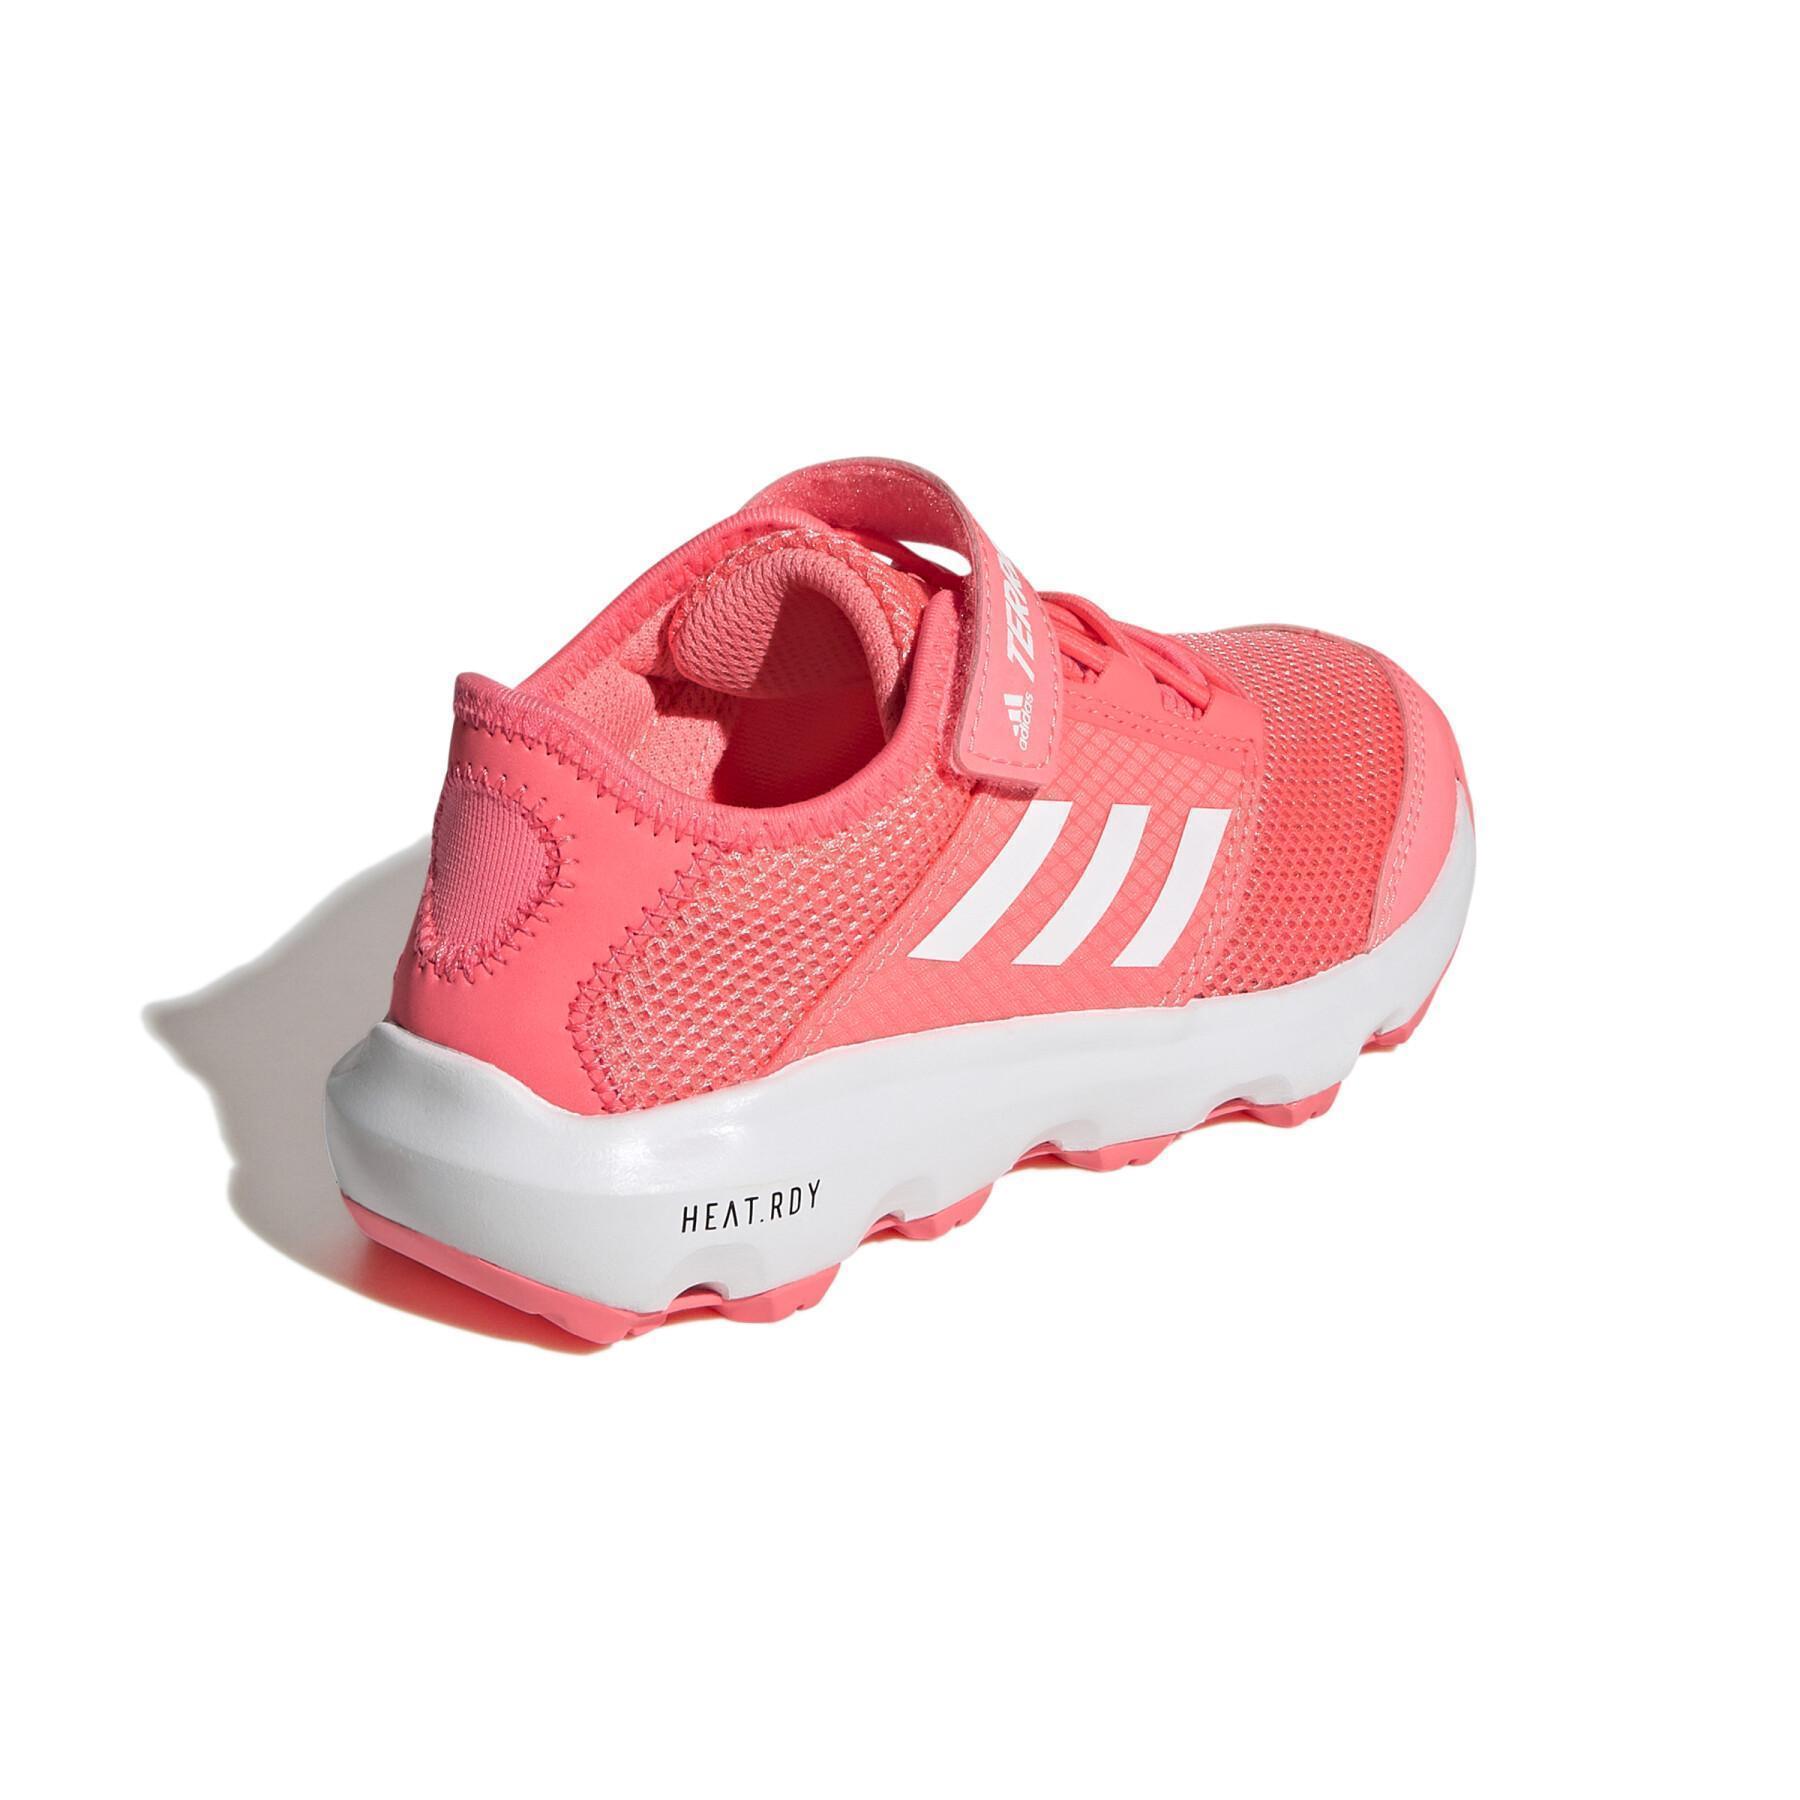 Children's shoes adidas Terrex Climacool Voyager Cfater